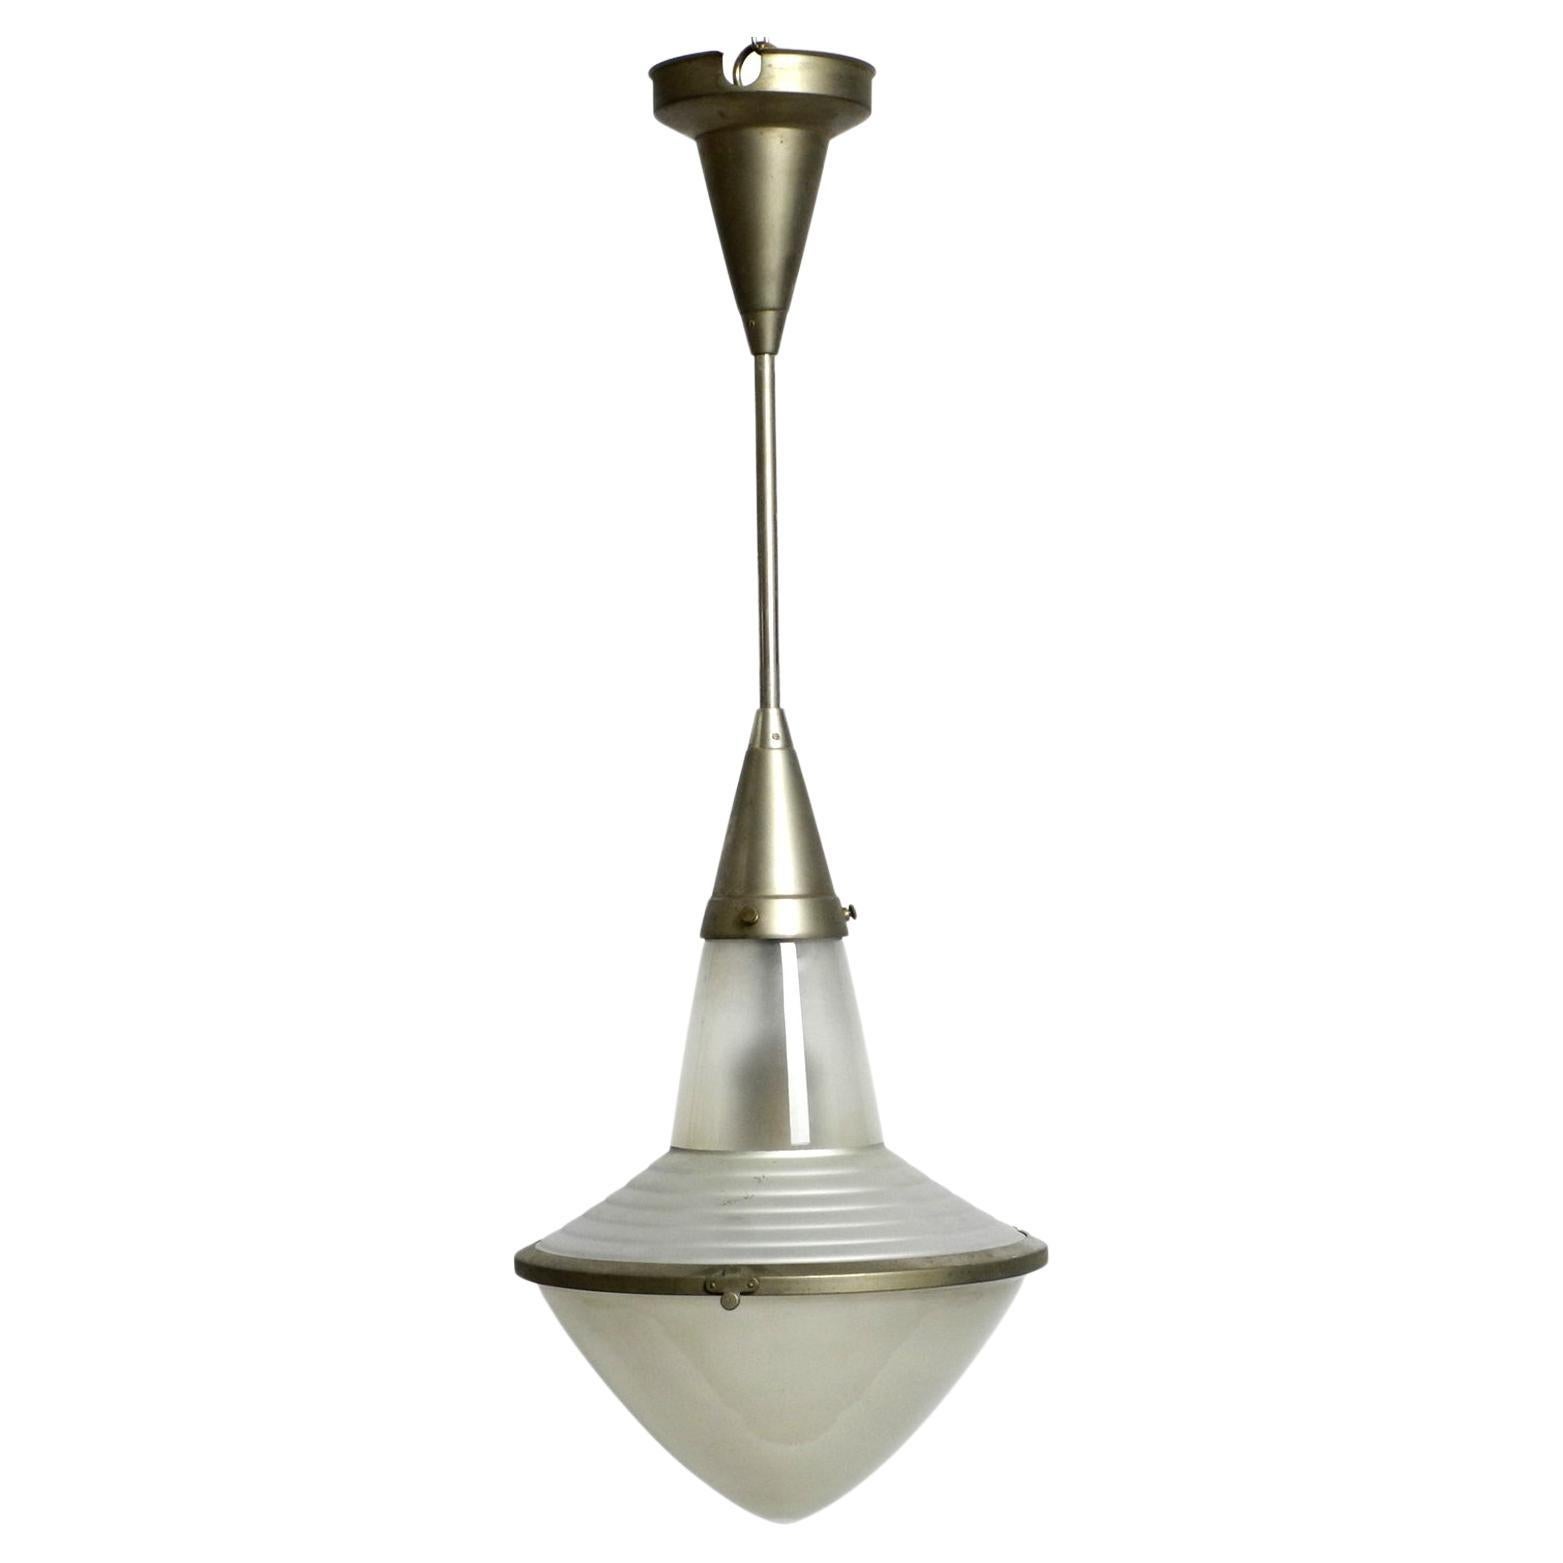 Rare 1930s Pendant Lamp by Adolf Meyer for Zeiss Ikon with an Adjustable Shade